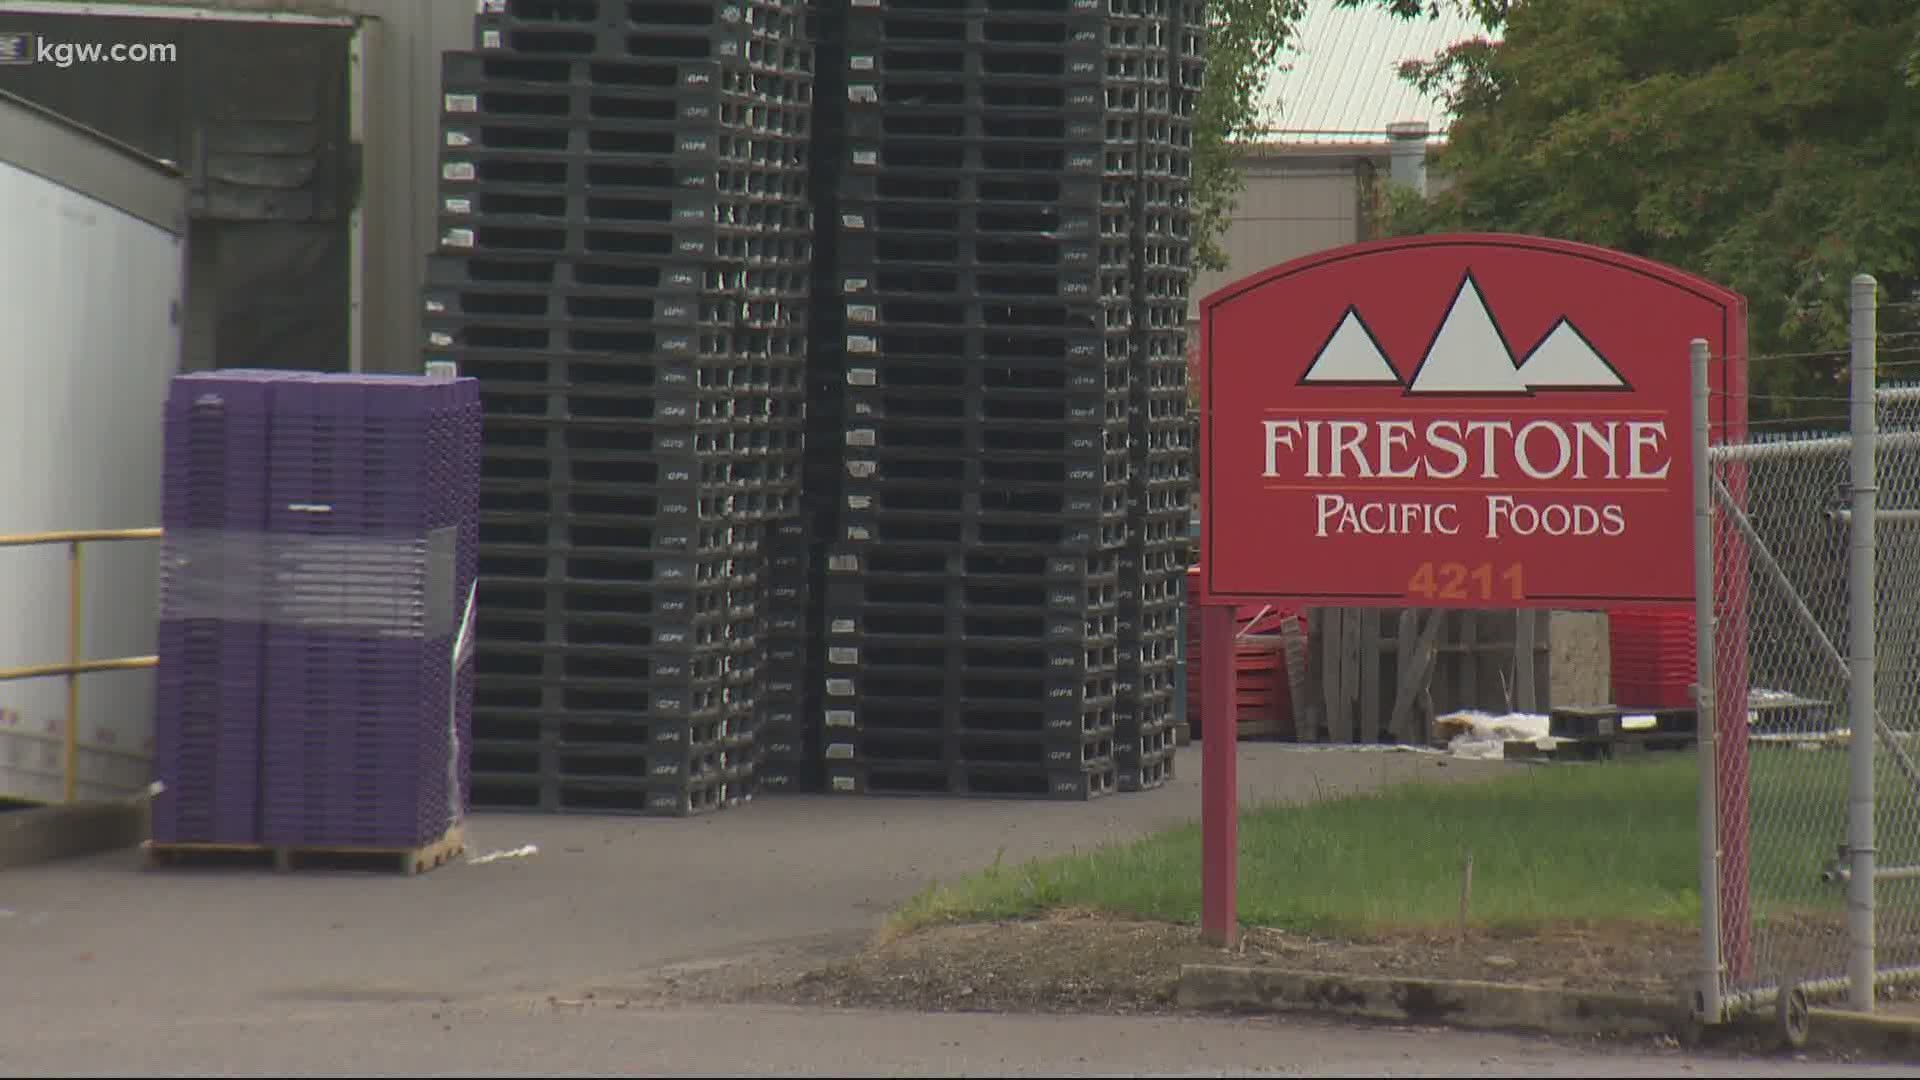 Of the 152 employees tested at Firestone Pacific Foods, 65 have tested positive for COVID-19.